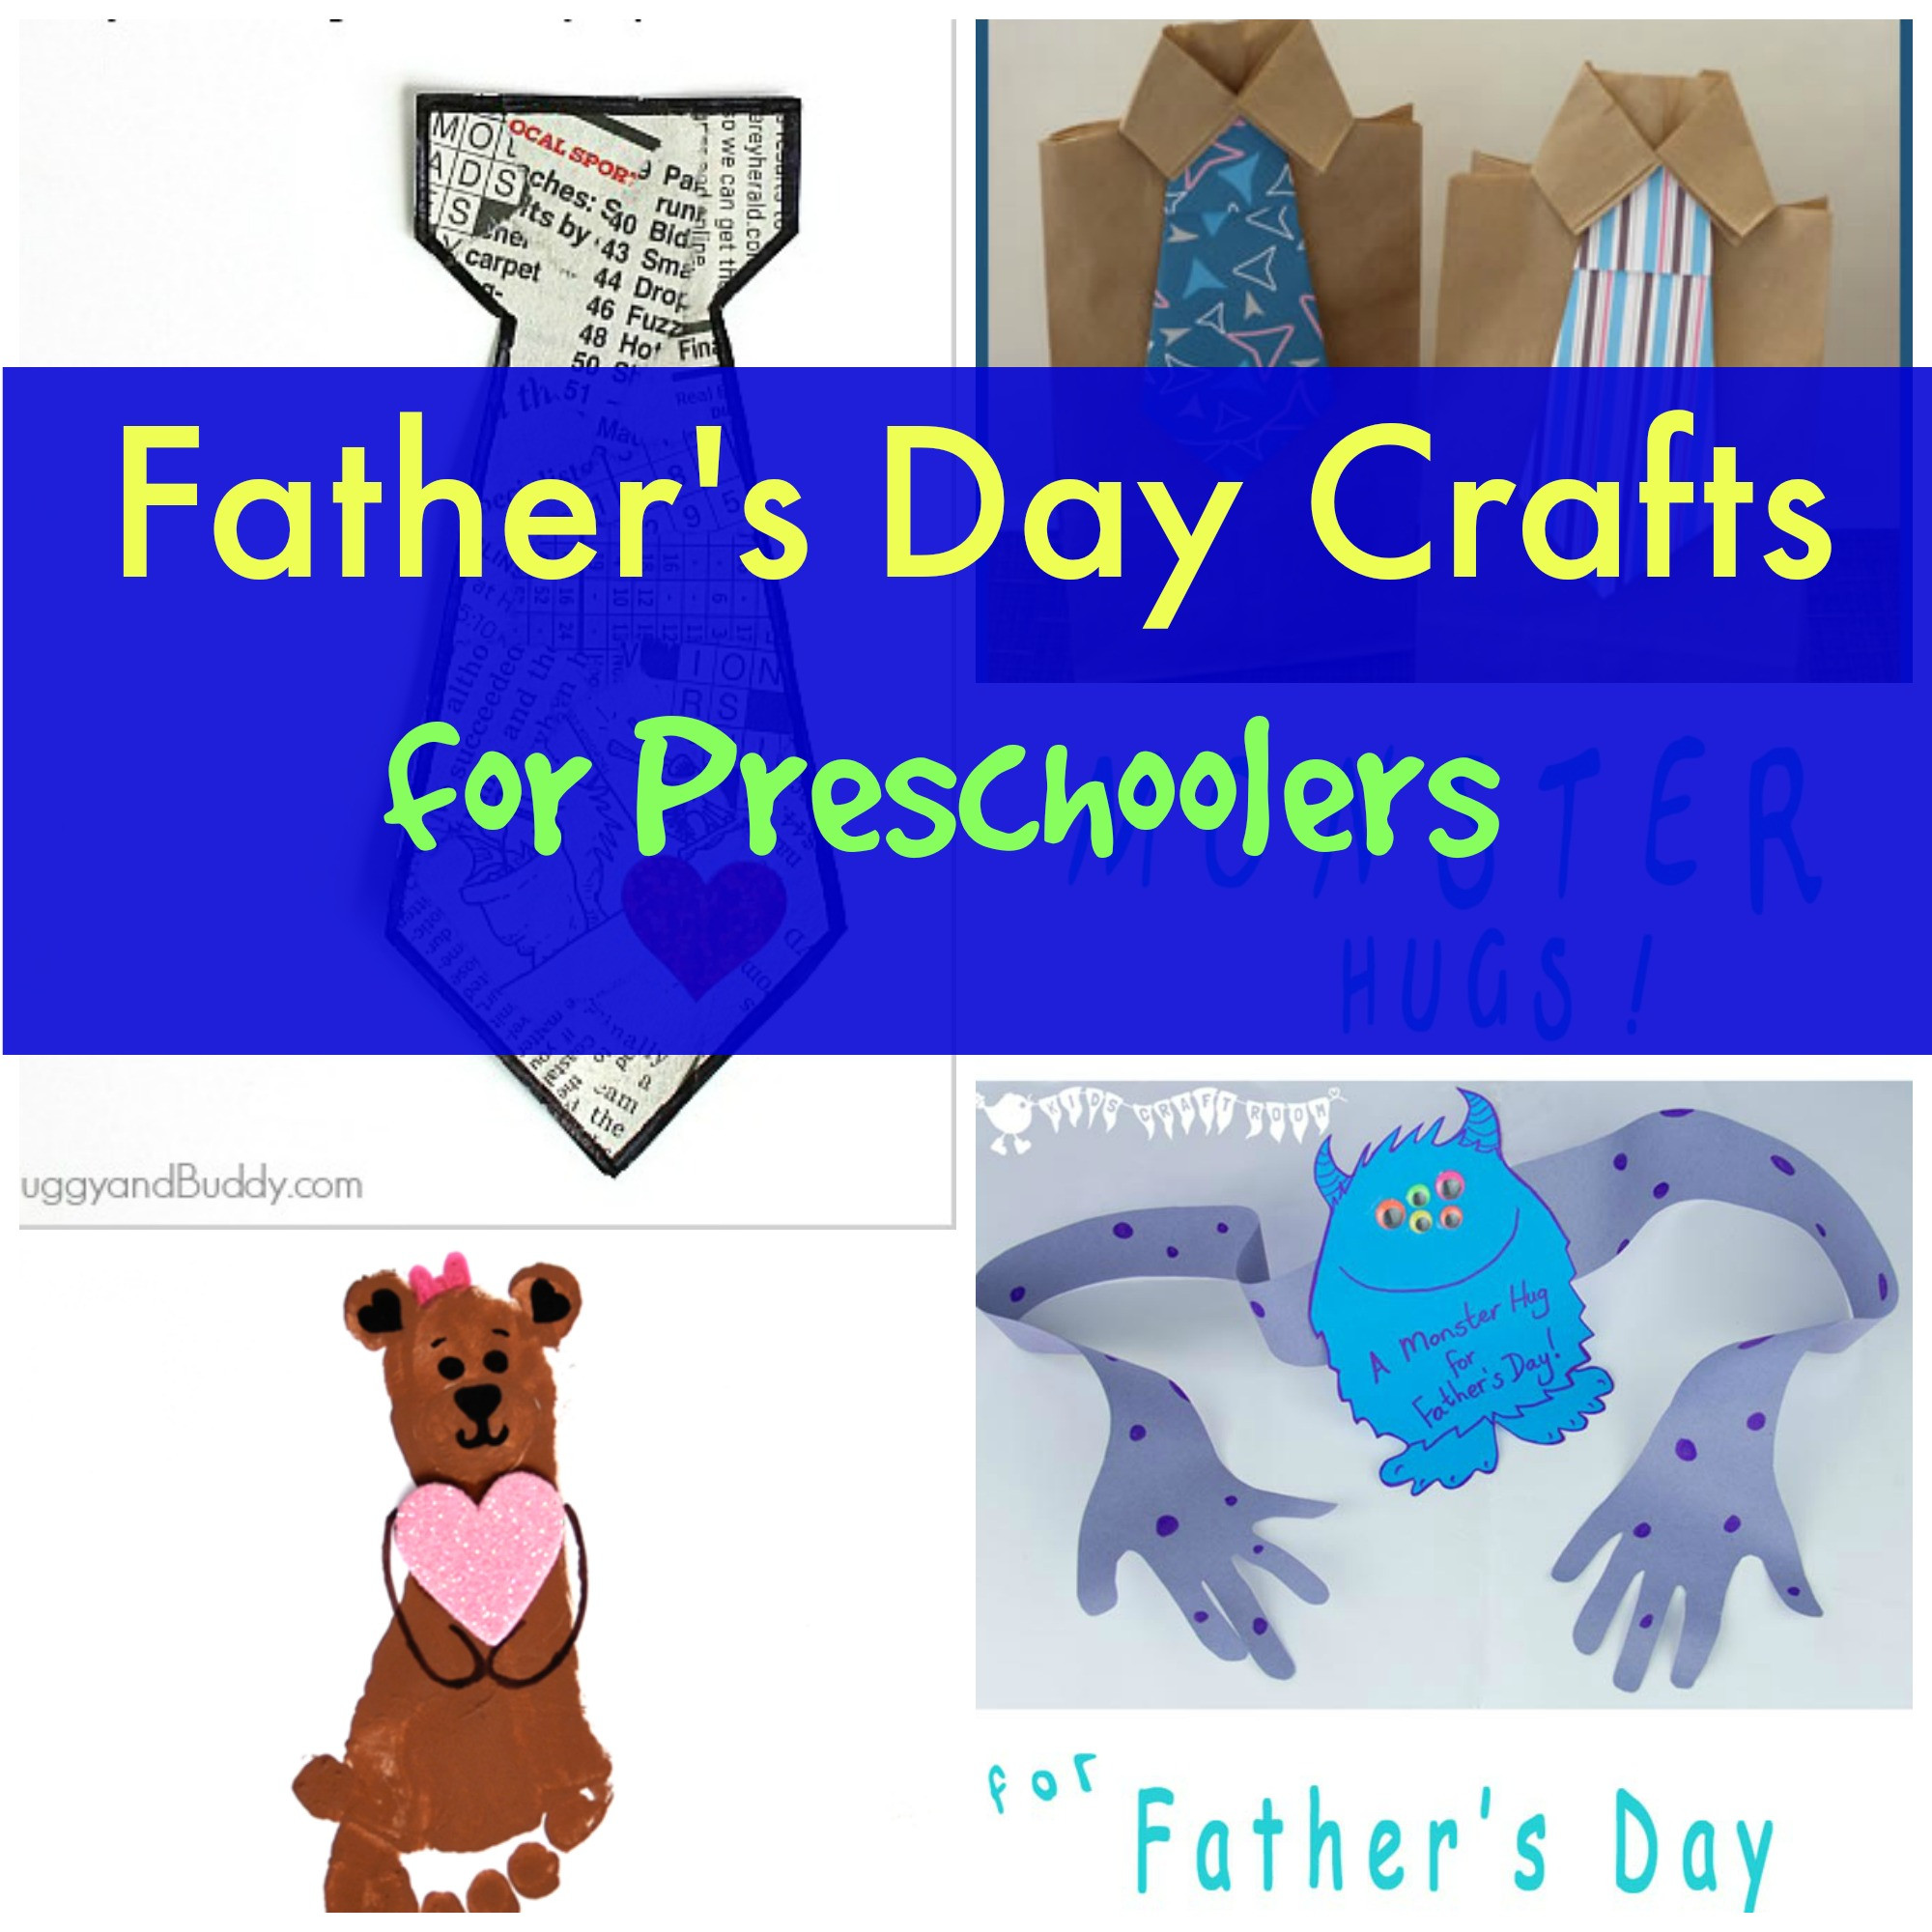 Fathers Day Craft For Preschool
 Fathers Day Crafts for Preschoolers Make Dad smile